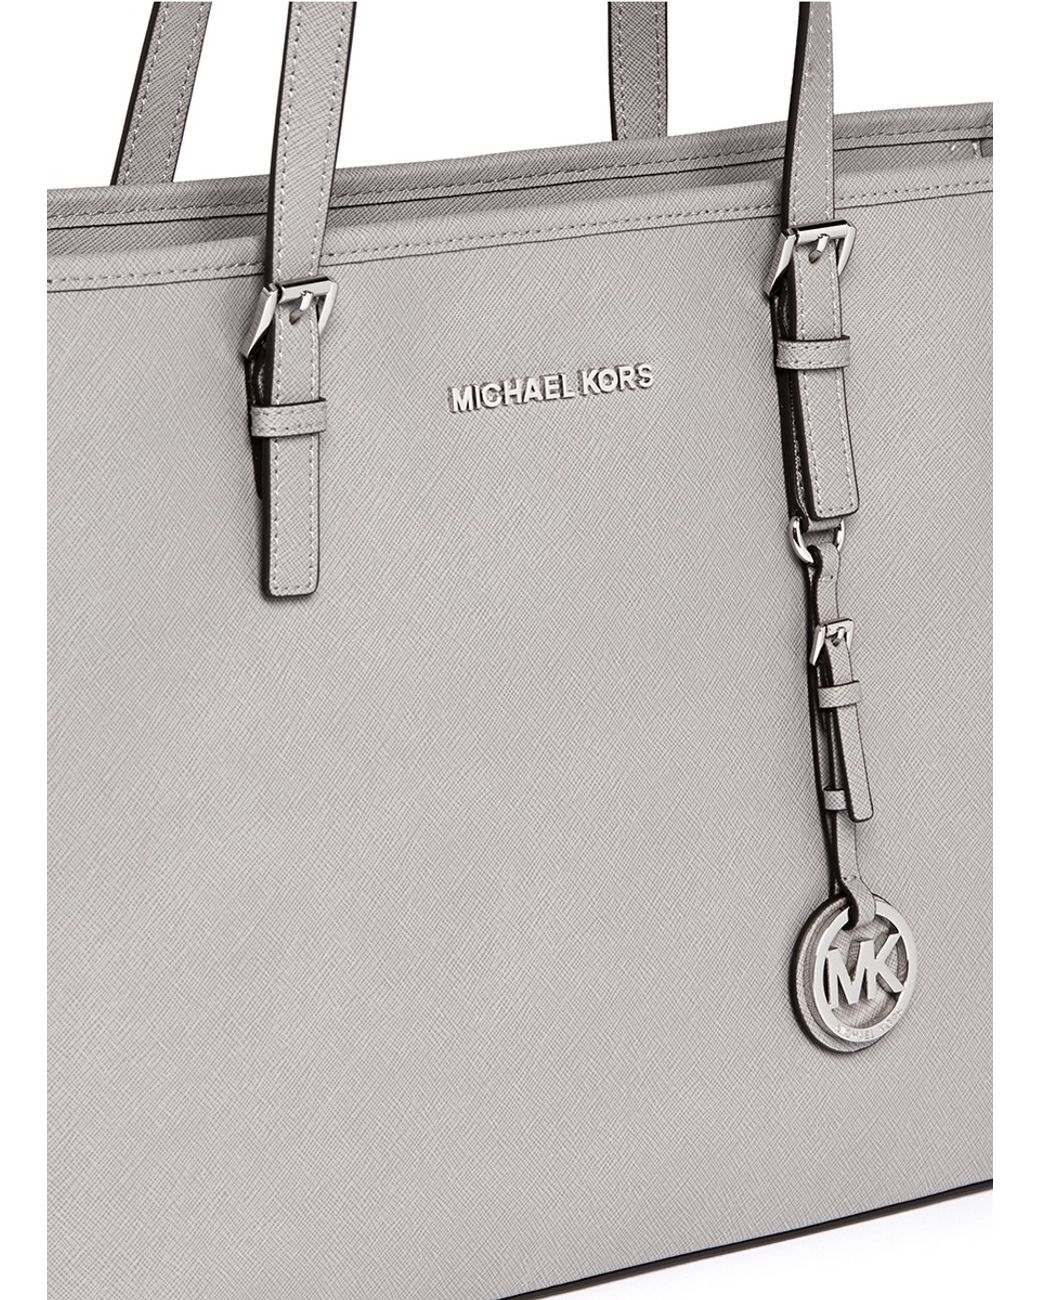 Michael Kors 'jet Set Travel' Saffiano Leather Top Zip Tote in Gray | Lyst